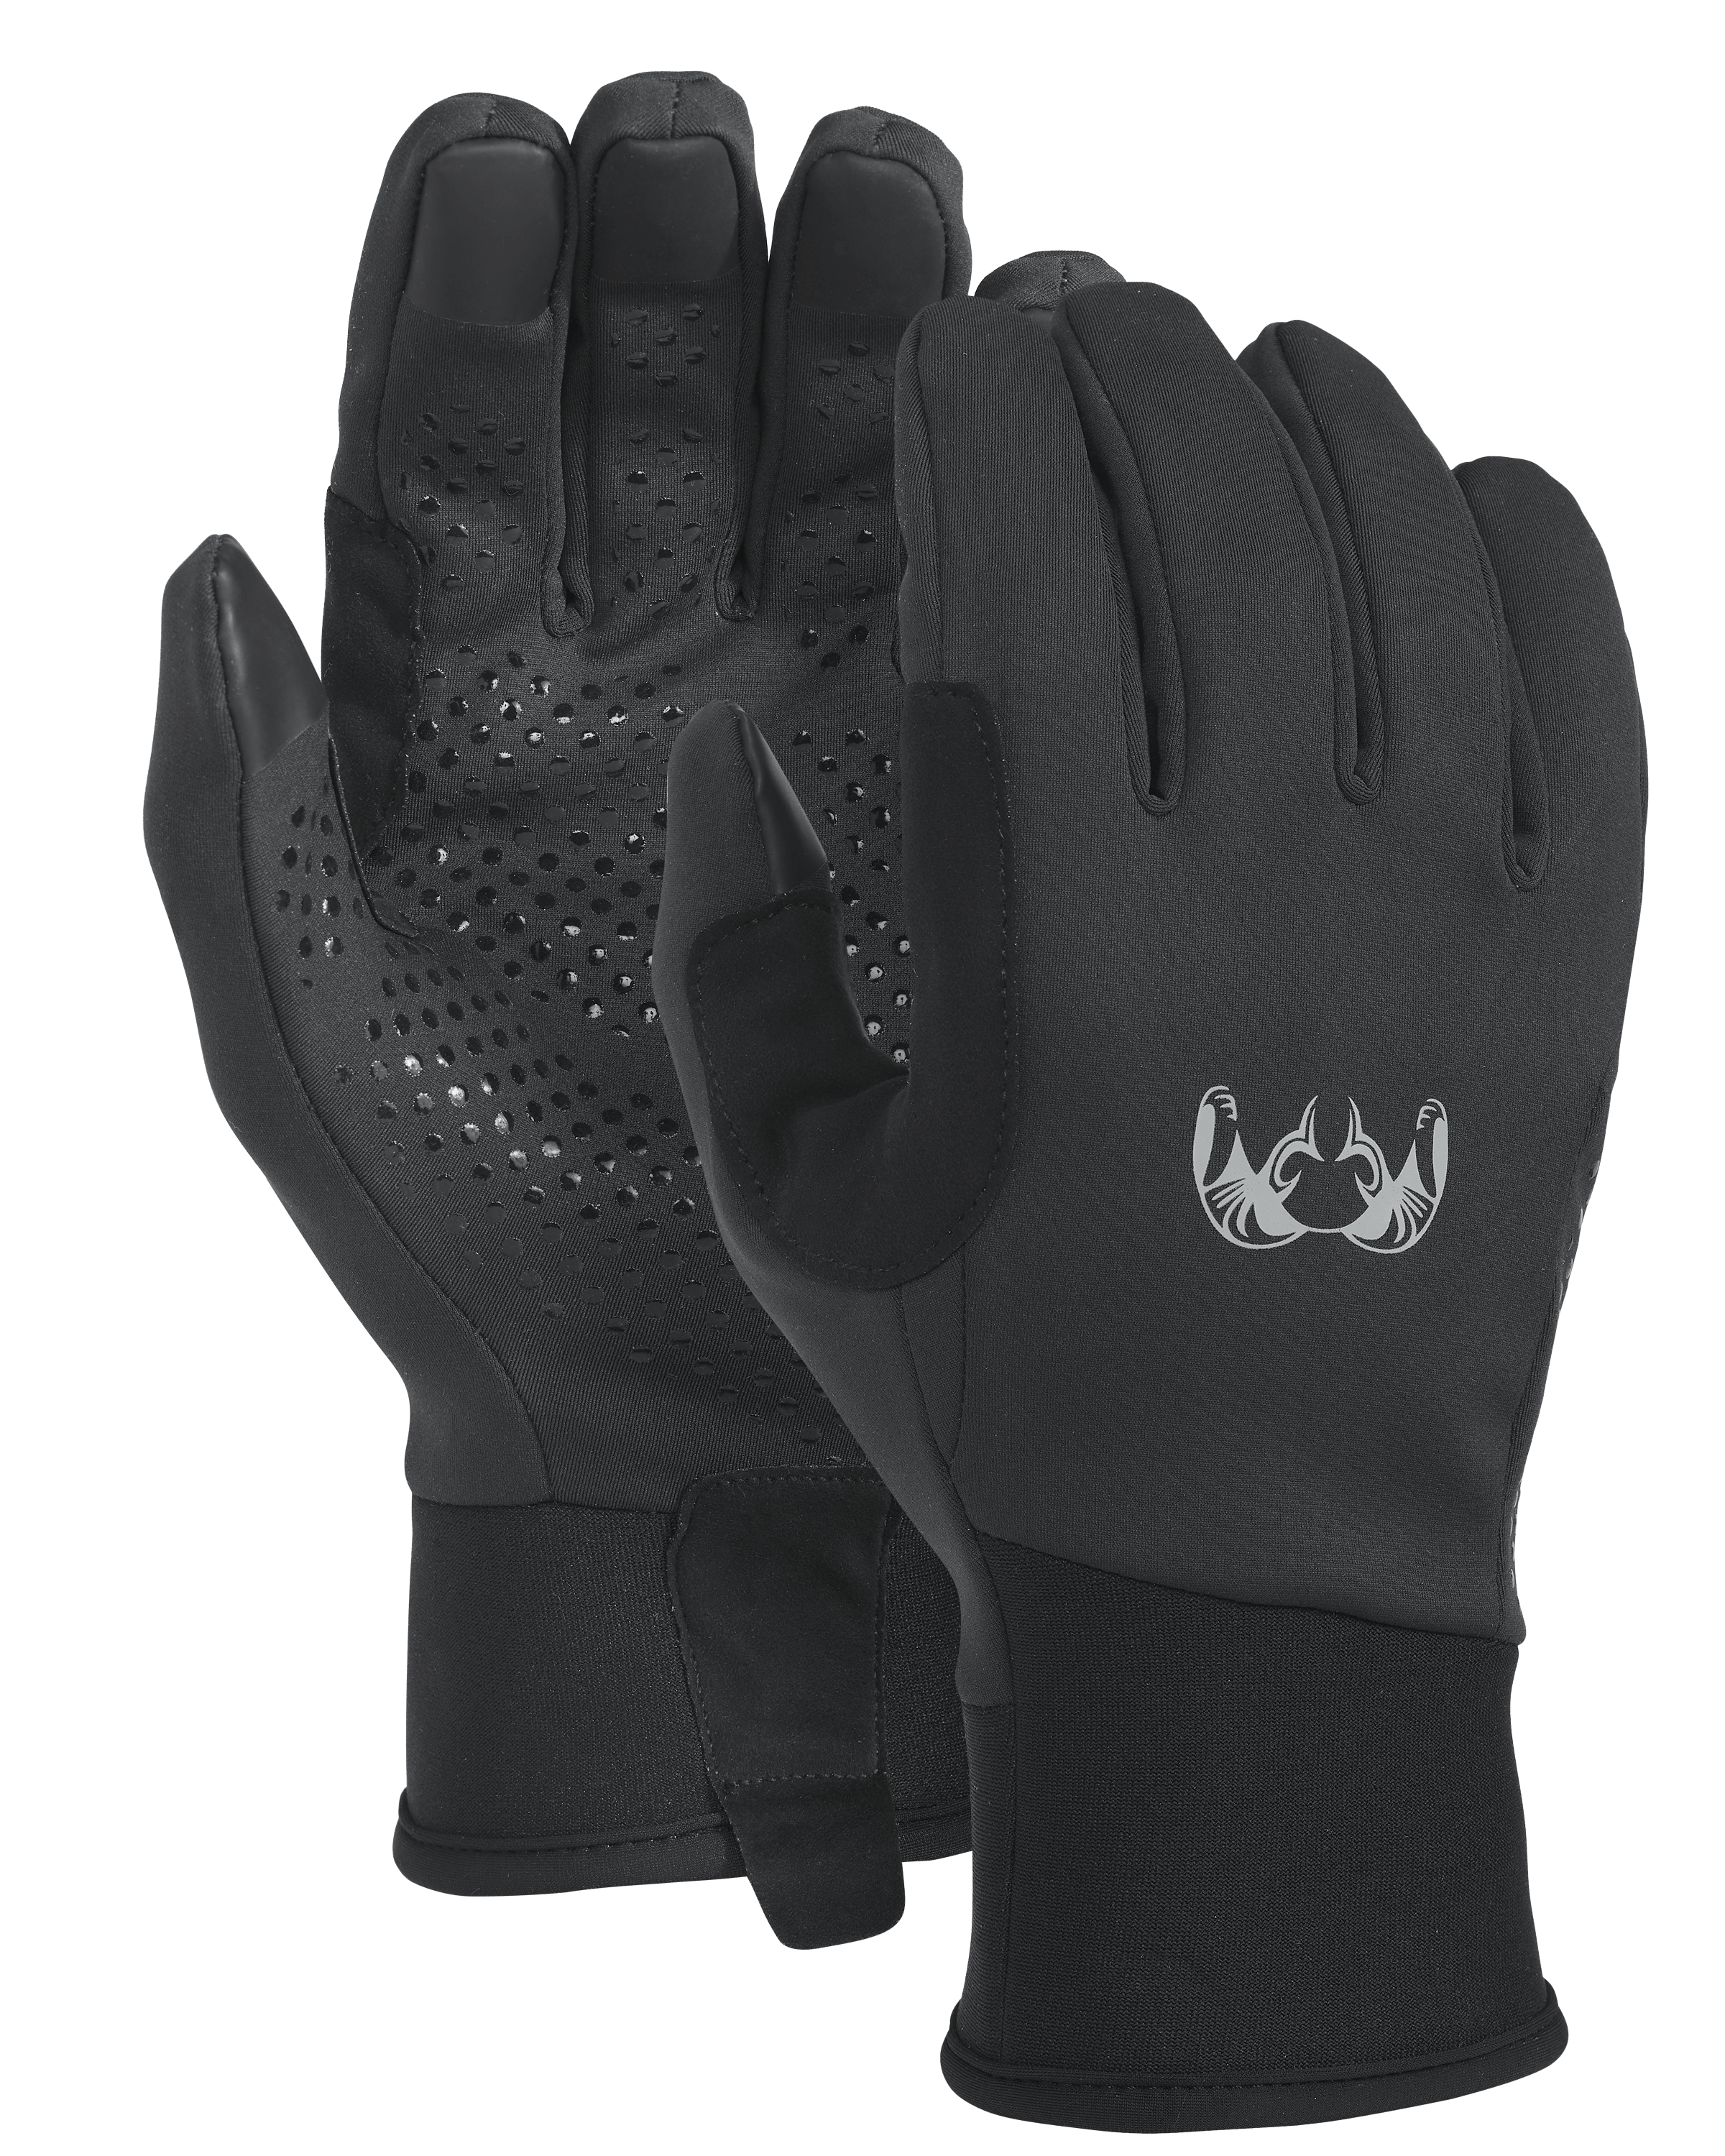 KUIU Axis Hunting Glove in Carbon | Size XL